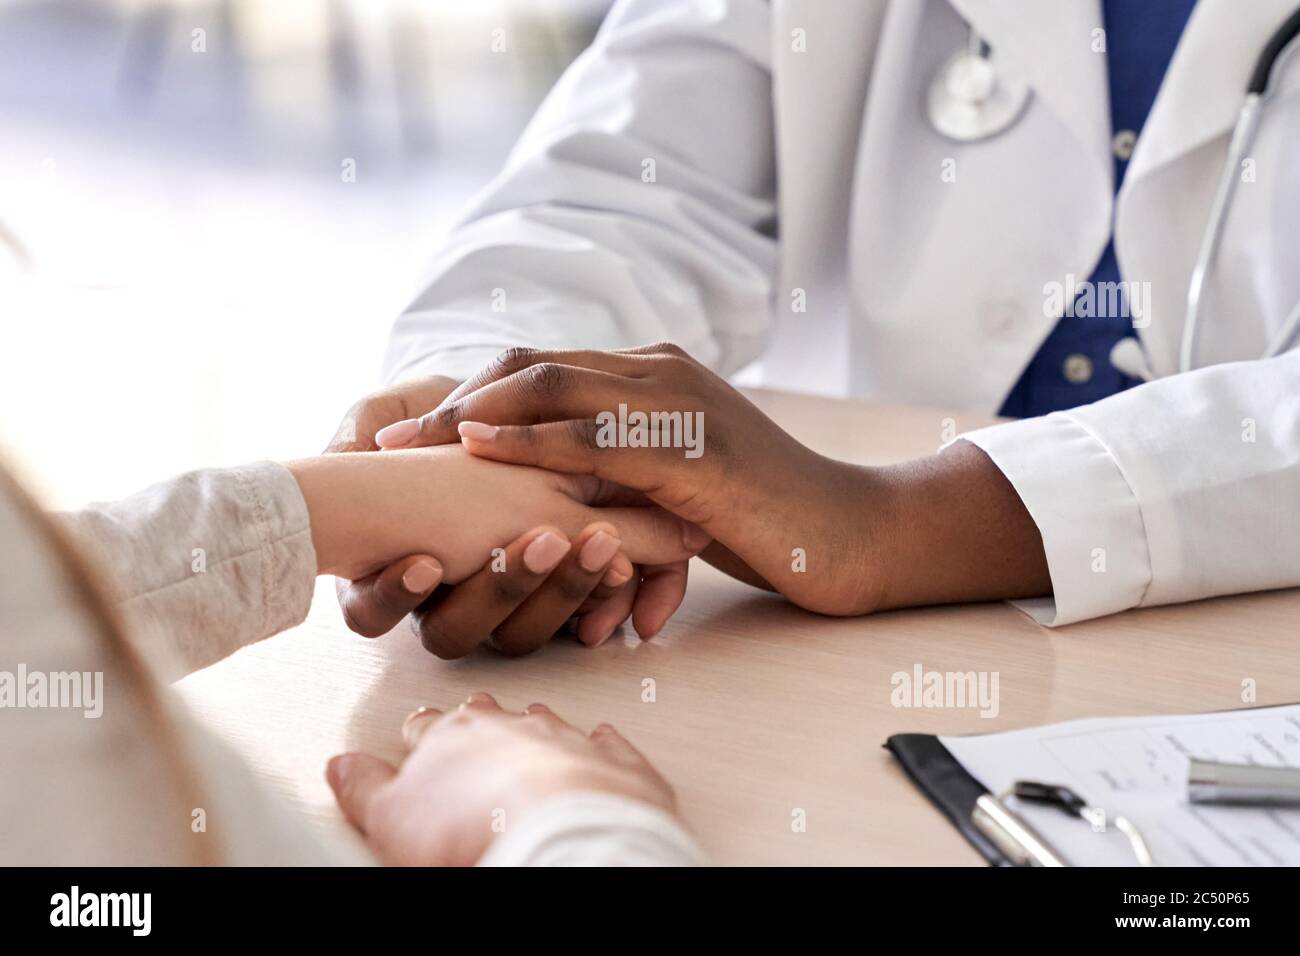 African doctor hold hand of caucasian patient give comfort, compassion, closeup. Stock Photo